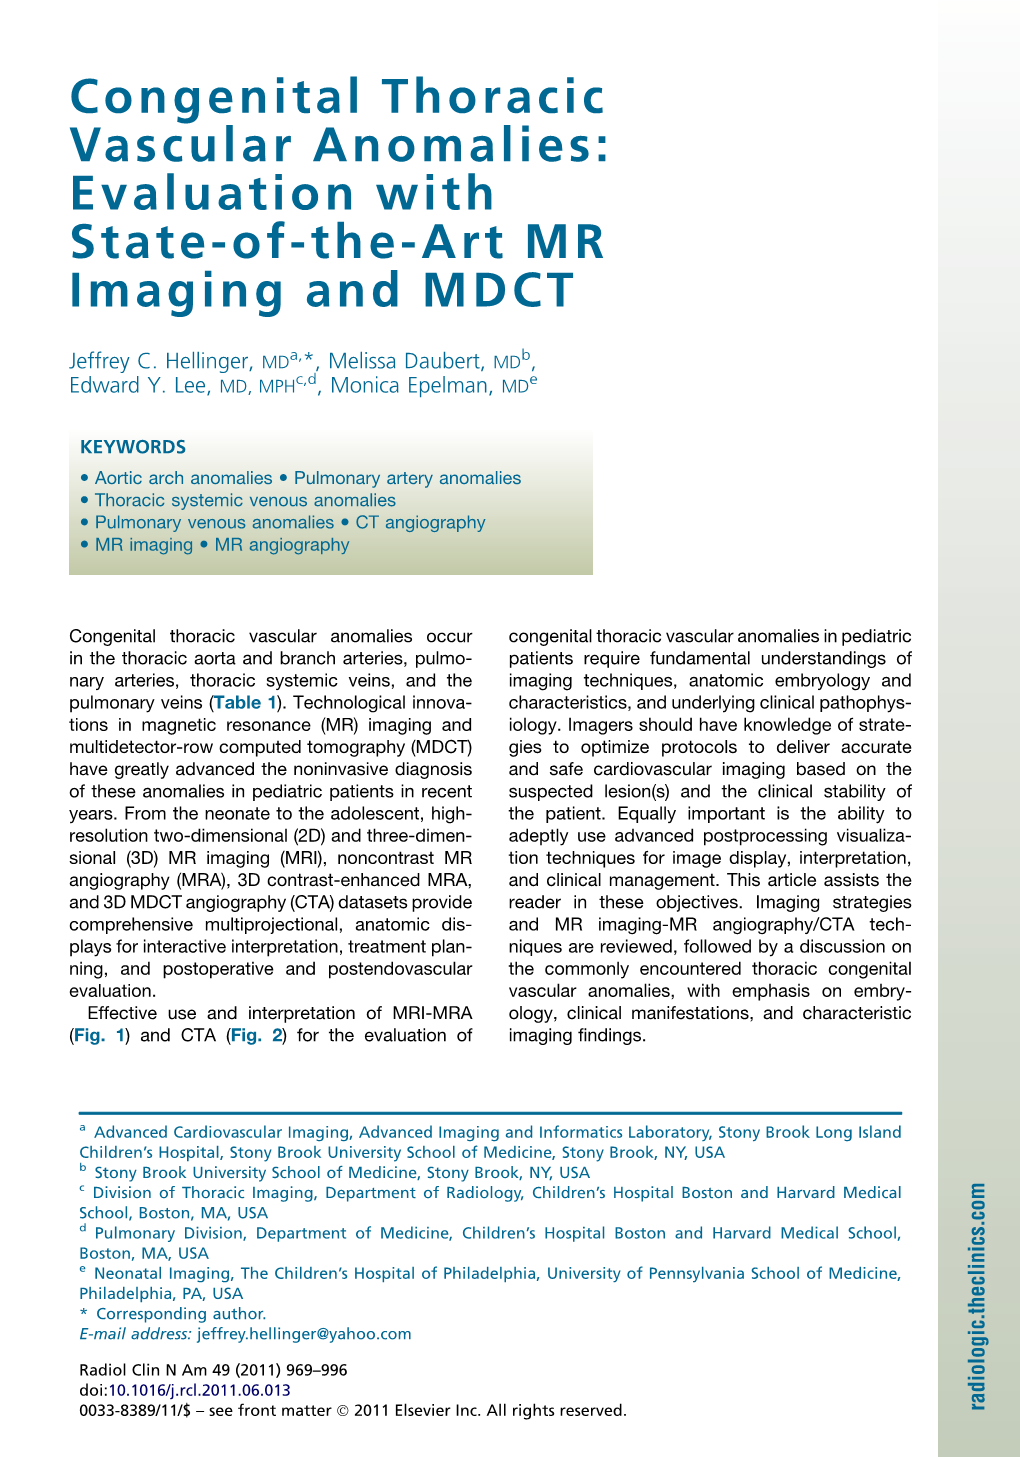 Congenital Thoracic Vascular Anomalies: Evaluation with State-Of-The-Art MR Imaging and MDCT